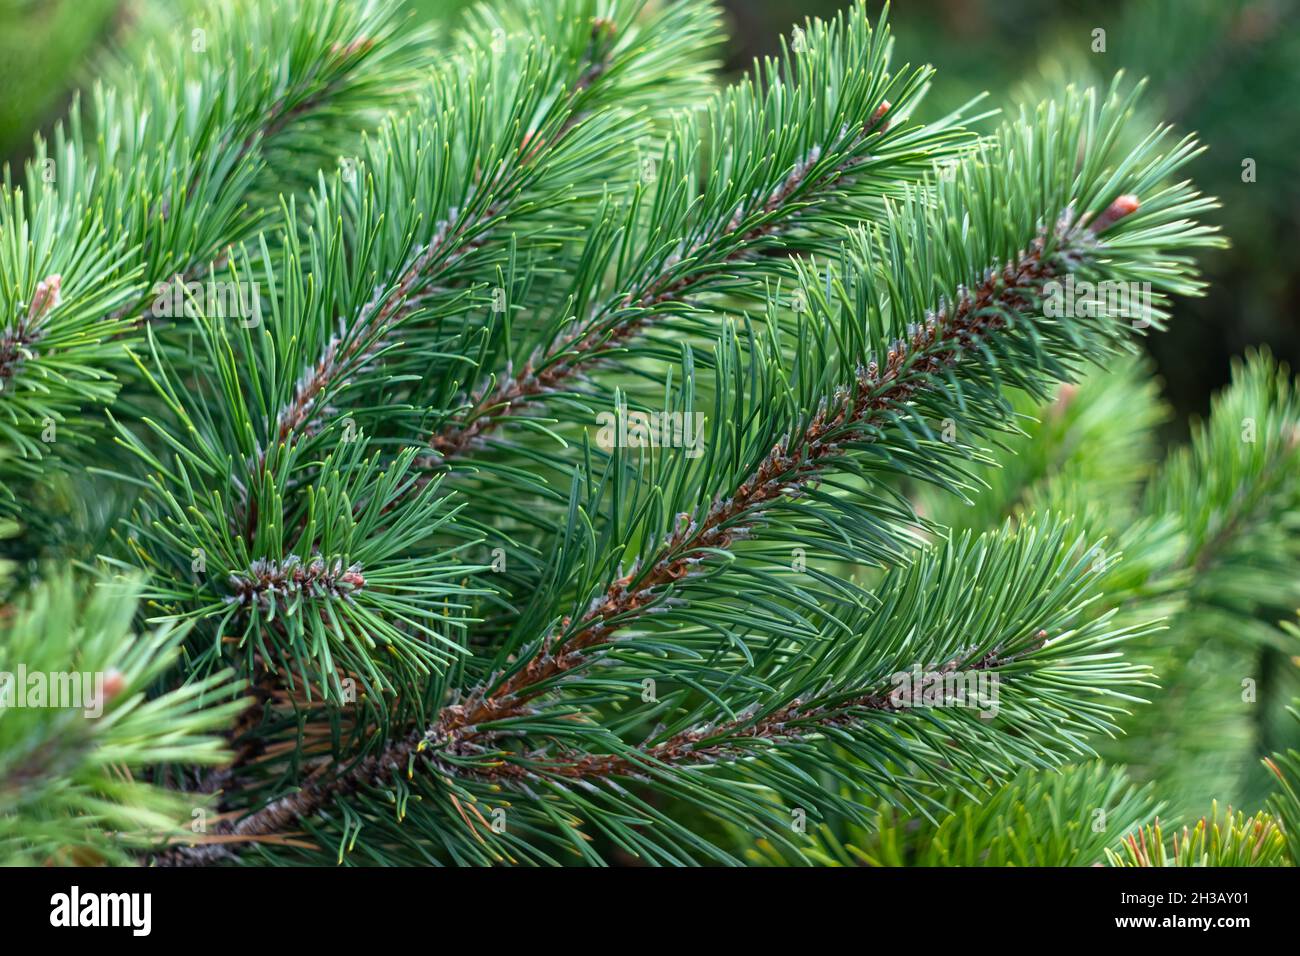 Branches of a fir tree. Spruce branch, evergreen, coniferous background. Pine needles close-up, pine-tree. Scotch fir. Green branches of fur tree. Chr Stock Photo